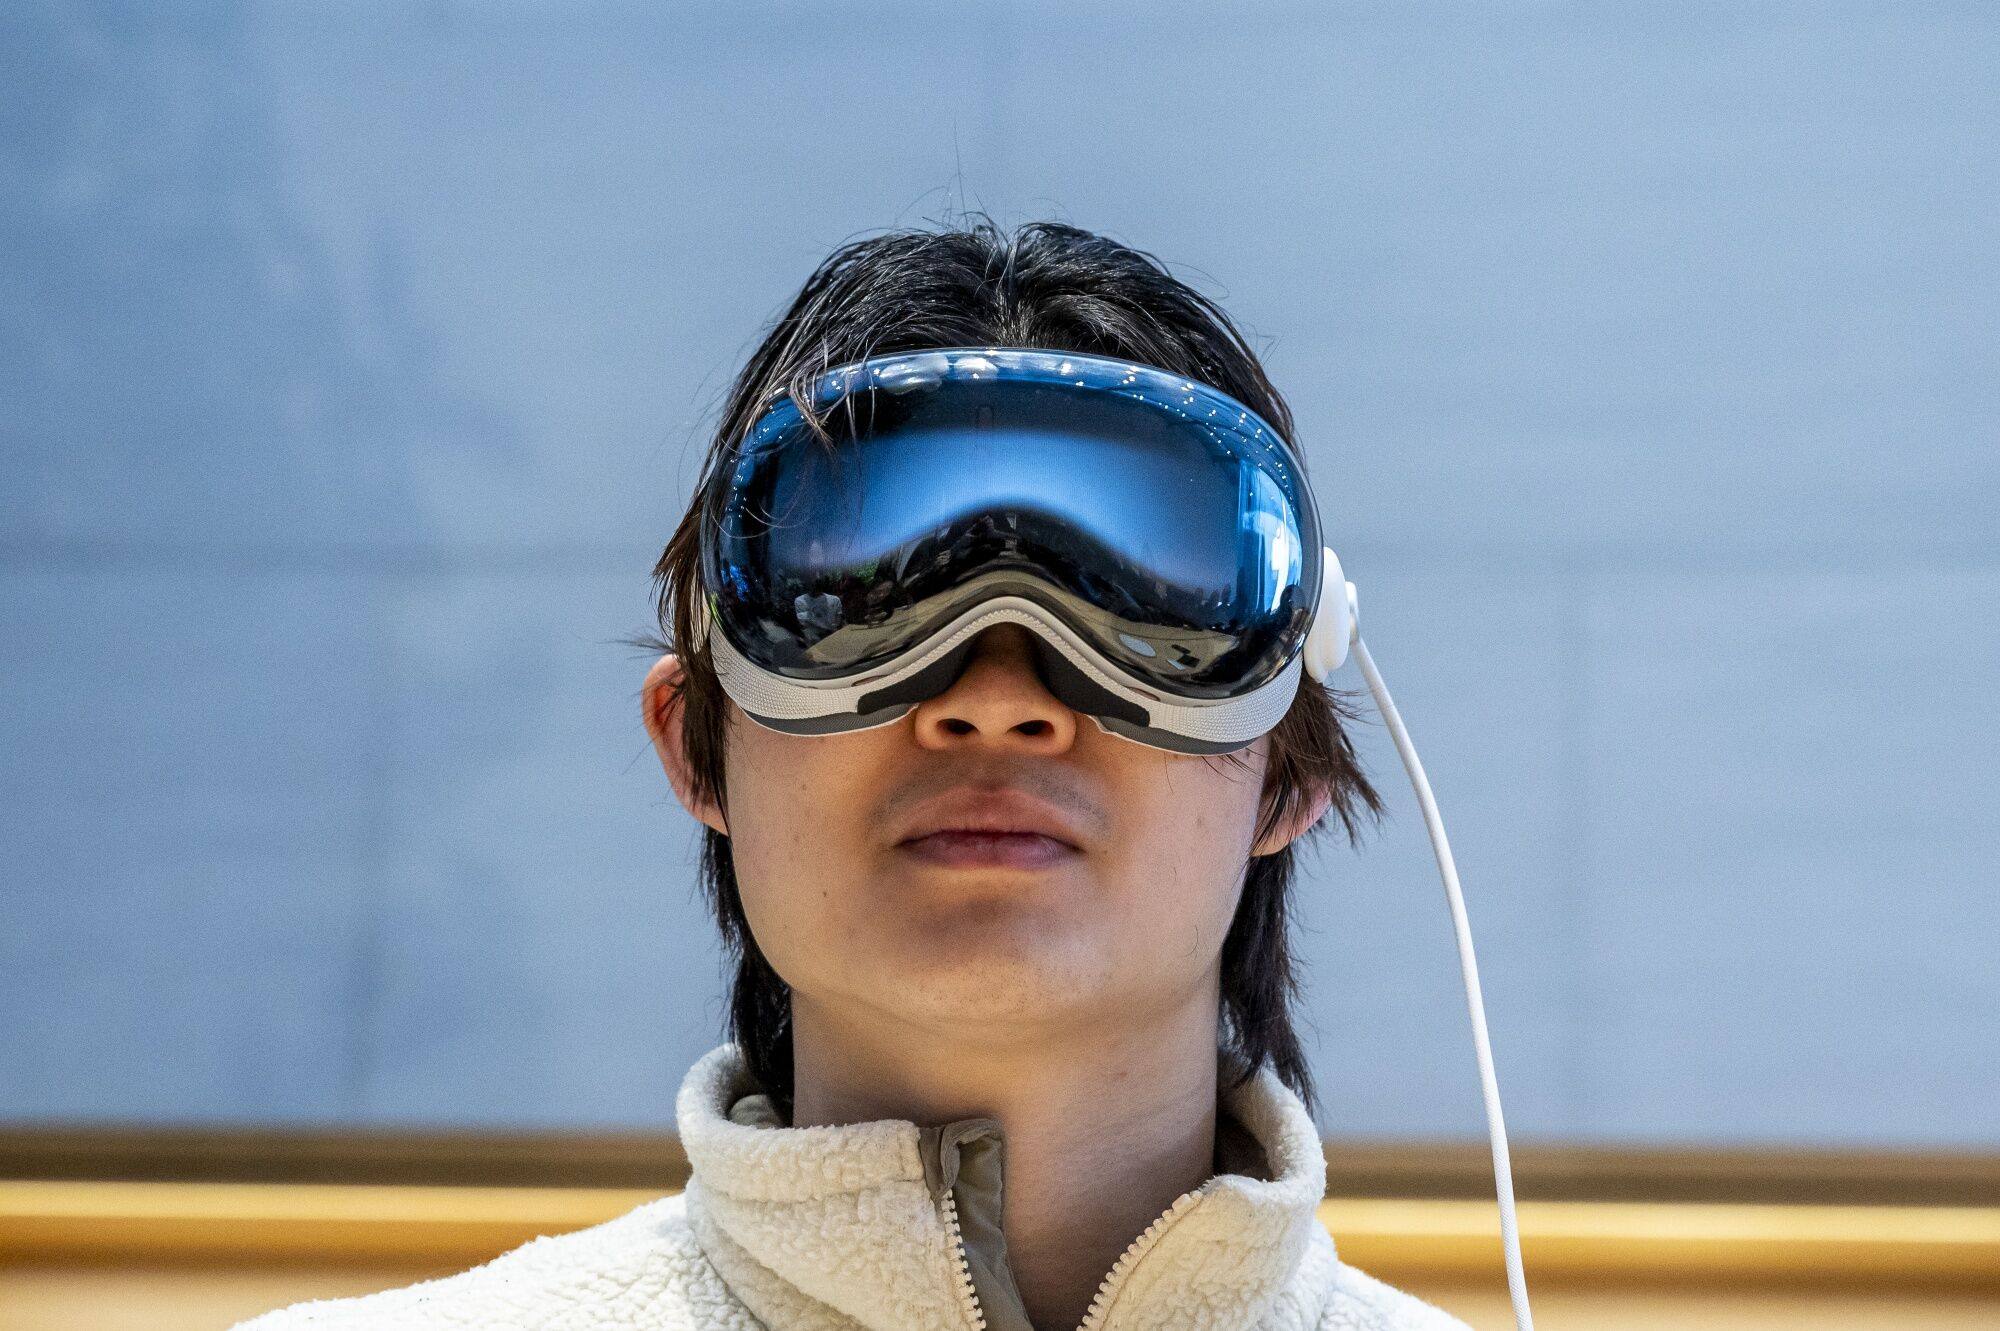 A customer tries out a Vision Pro headset at an Apple store in Palo Alto, California. Photo: Bloomberg